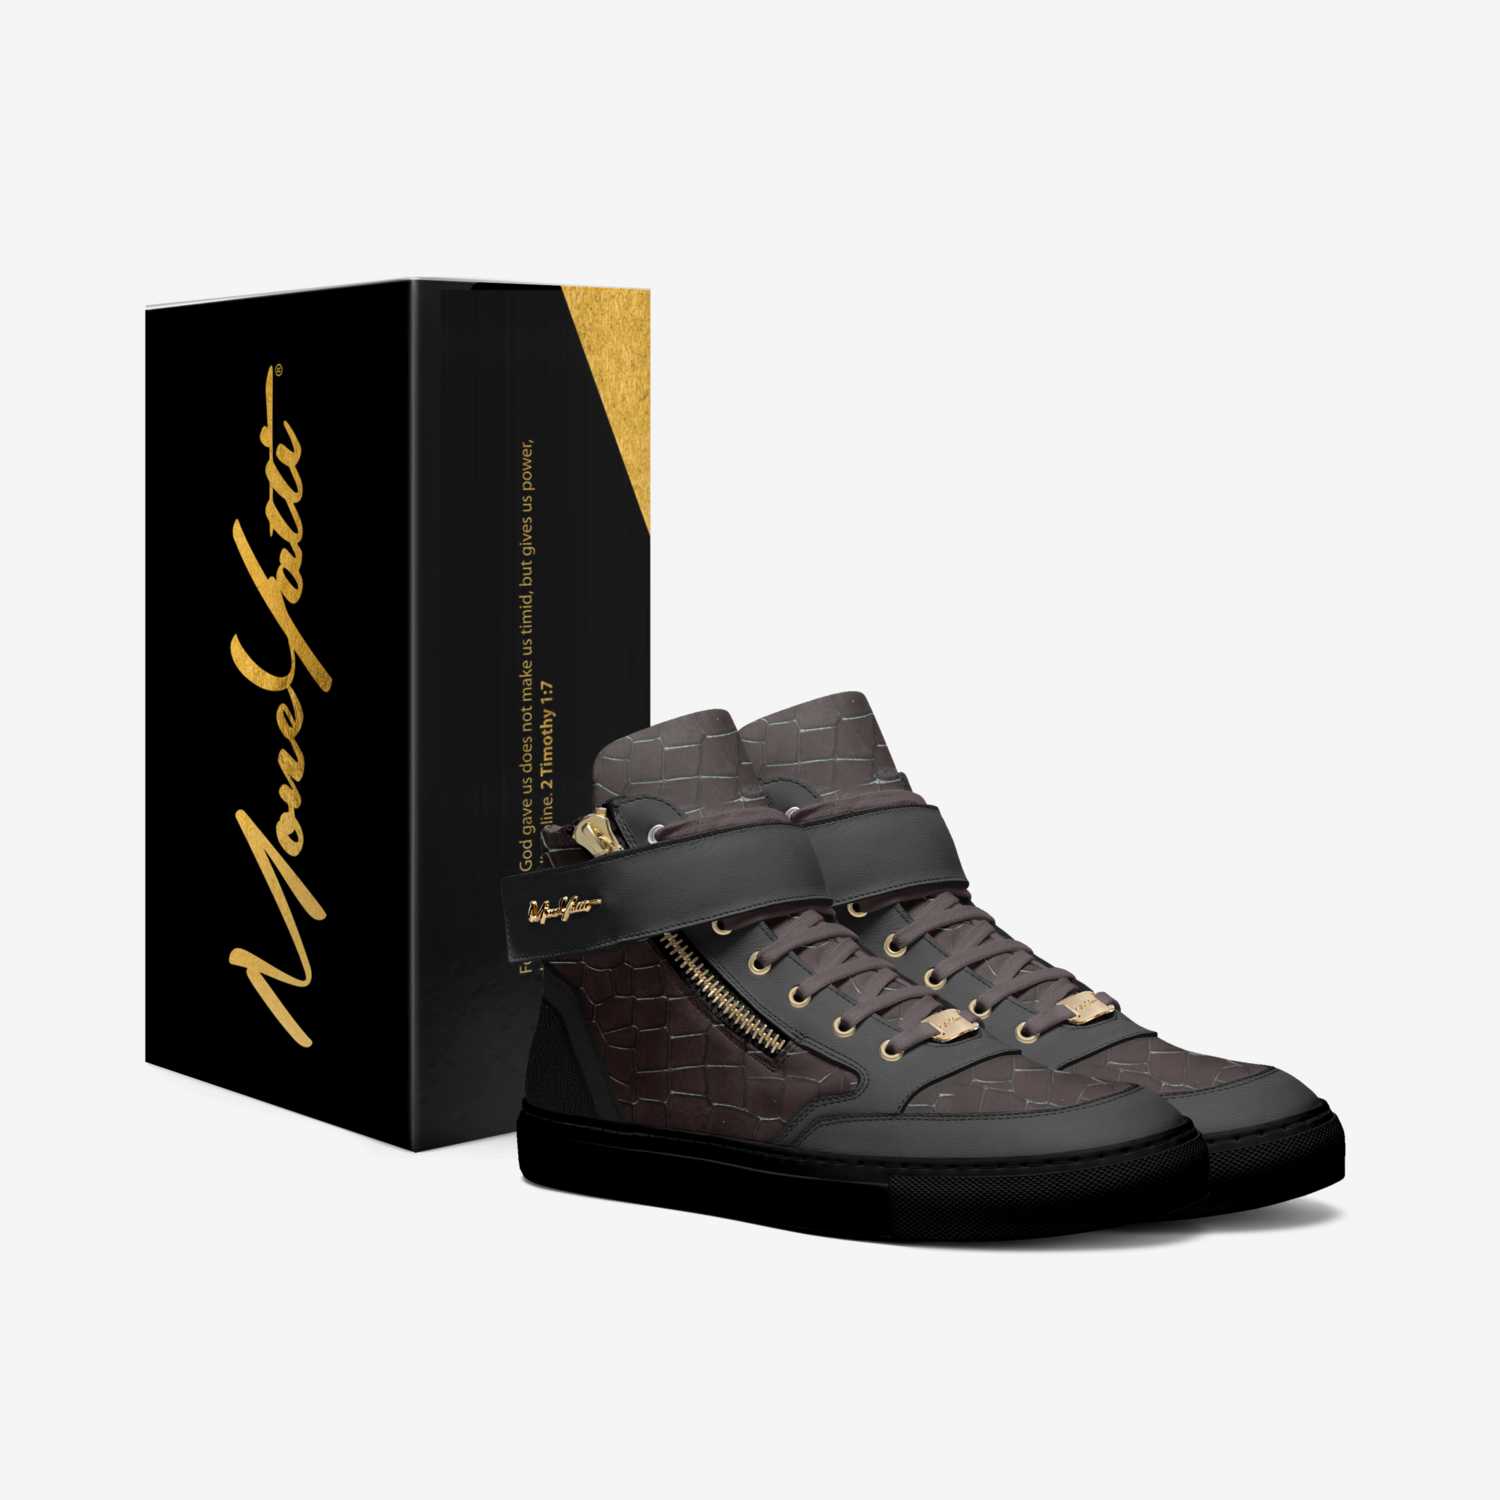 Legends05 custom made in Italy shoes by Moneyatti Brand | Box view